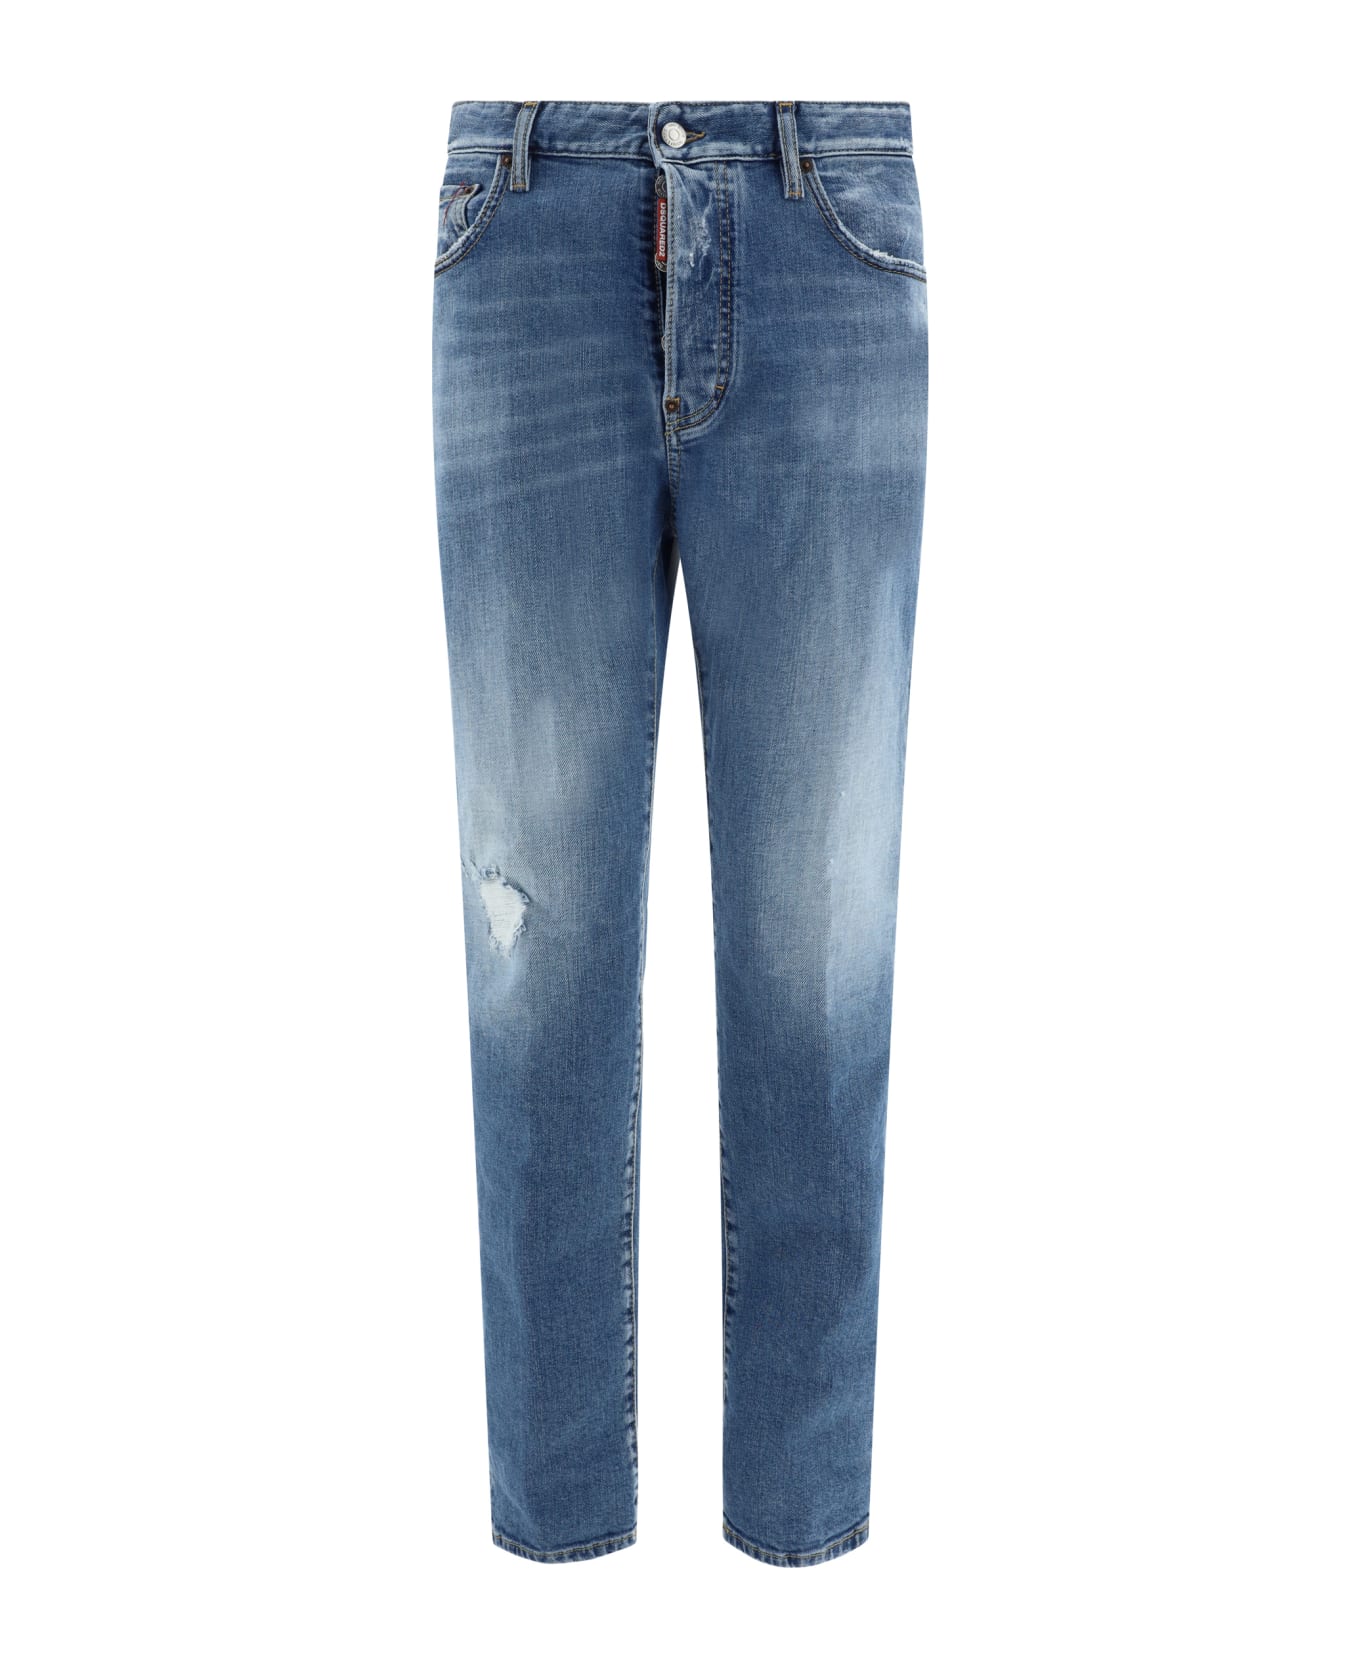 Dsquared2 642 Jeans - Navy Blue